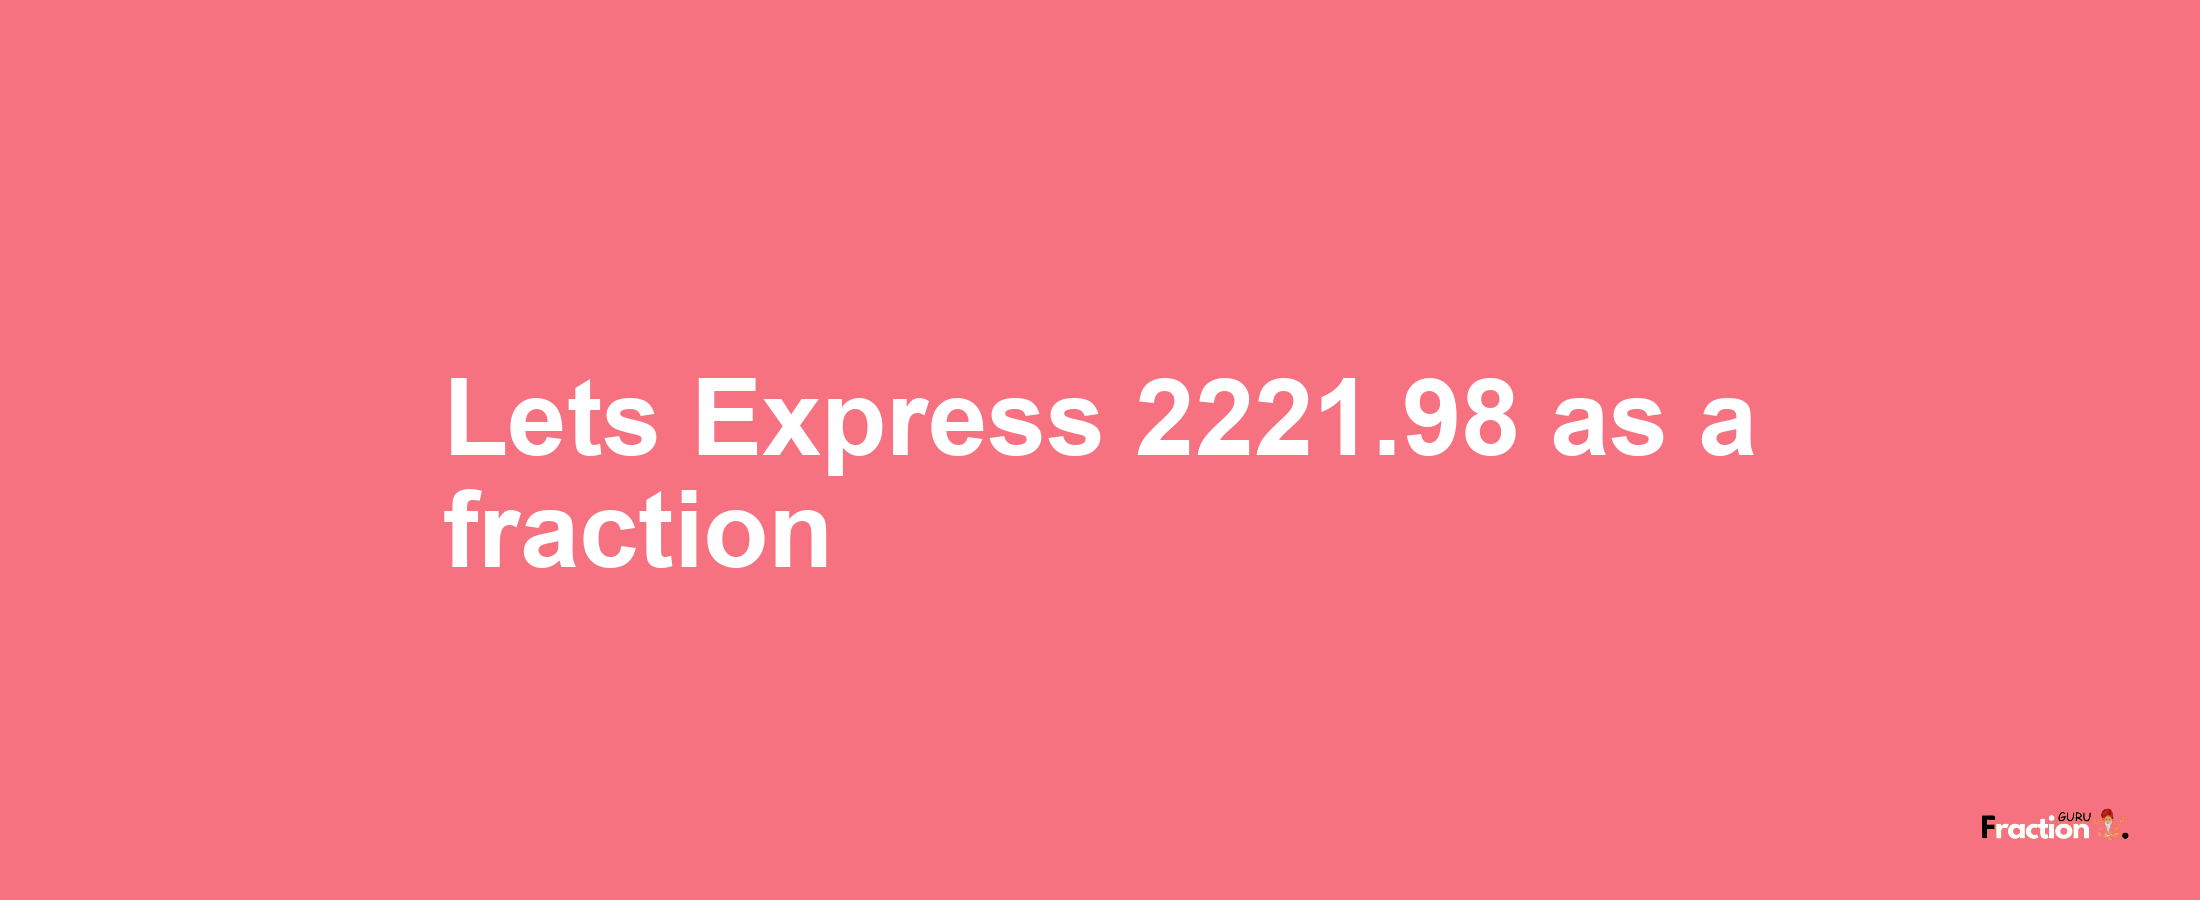 Lets Express 2221.98 as afraction